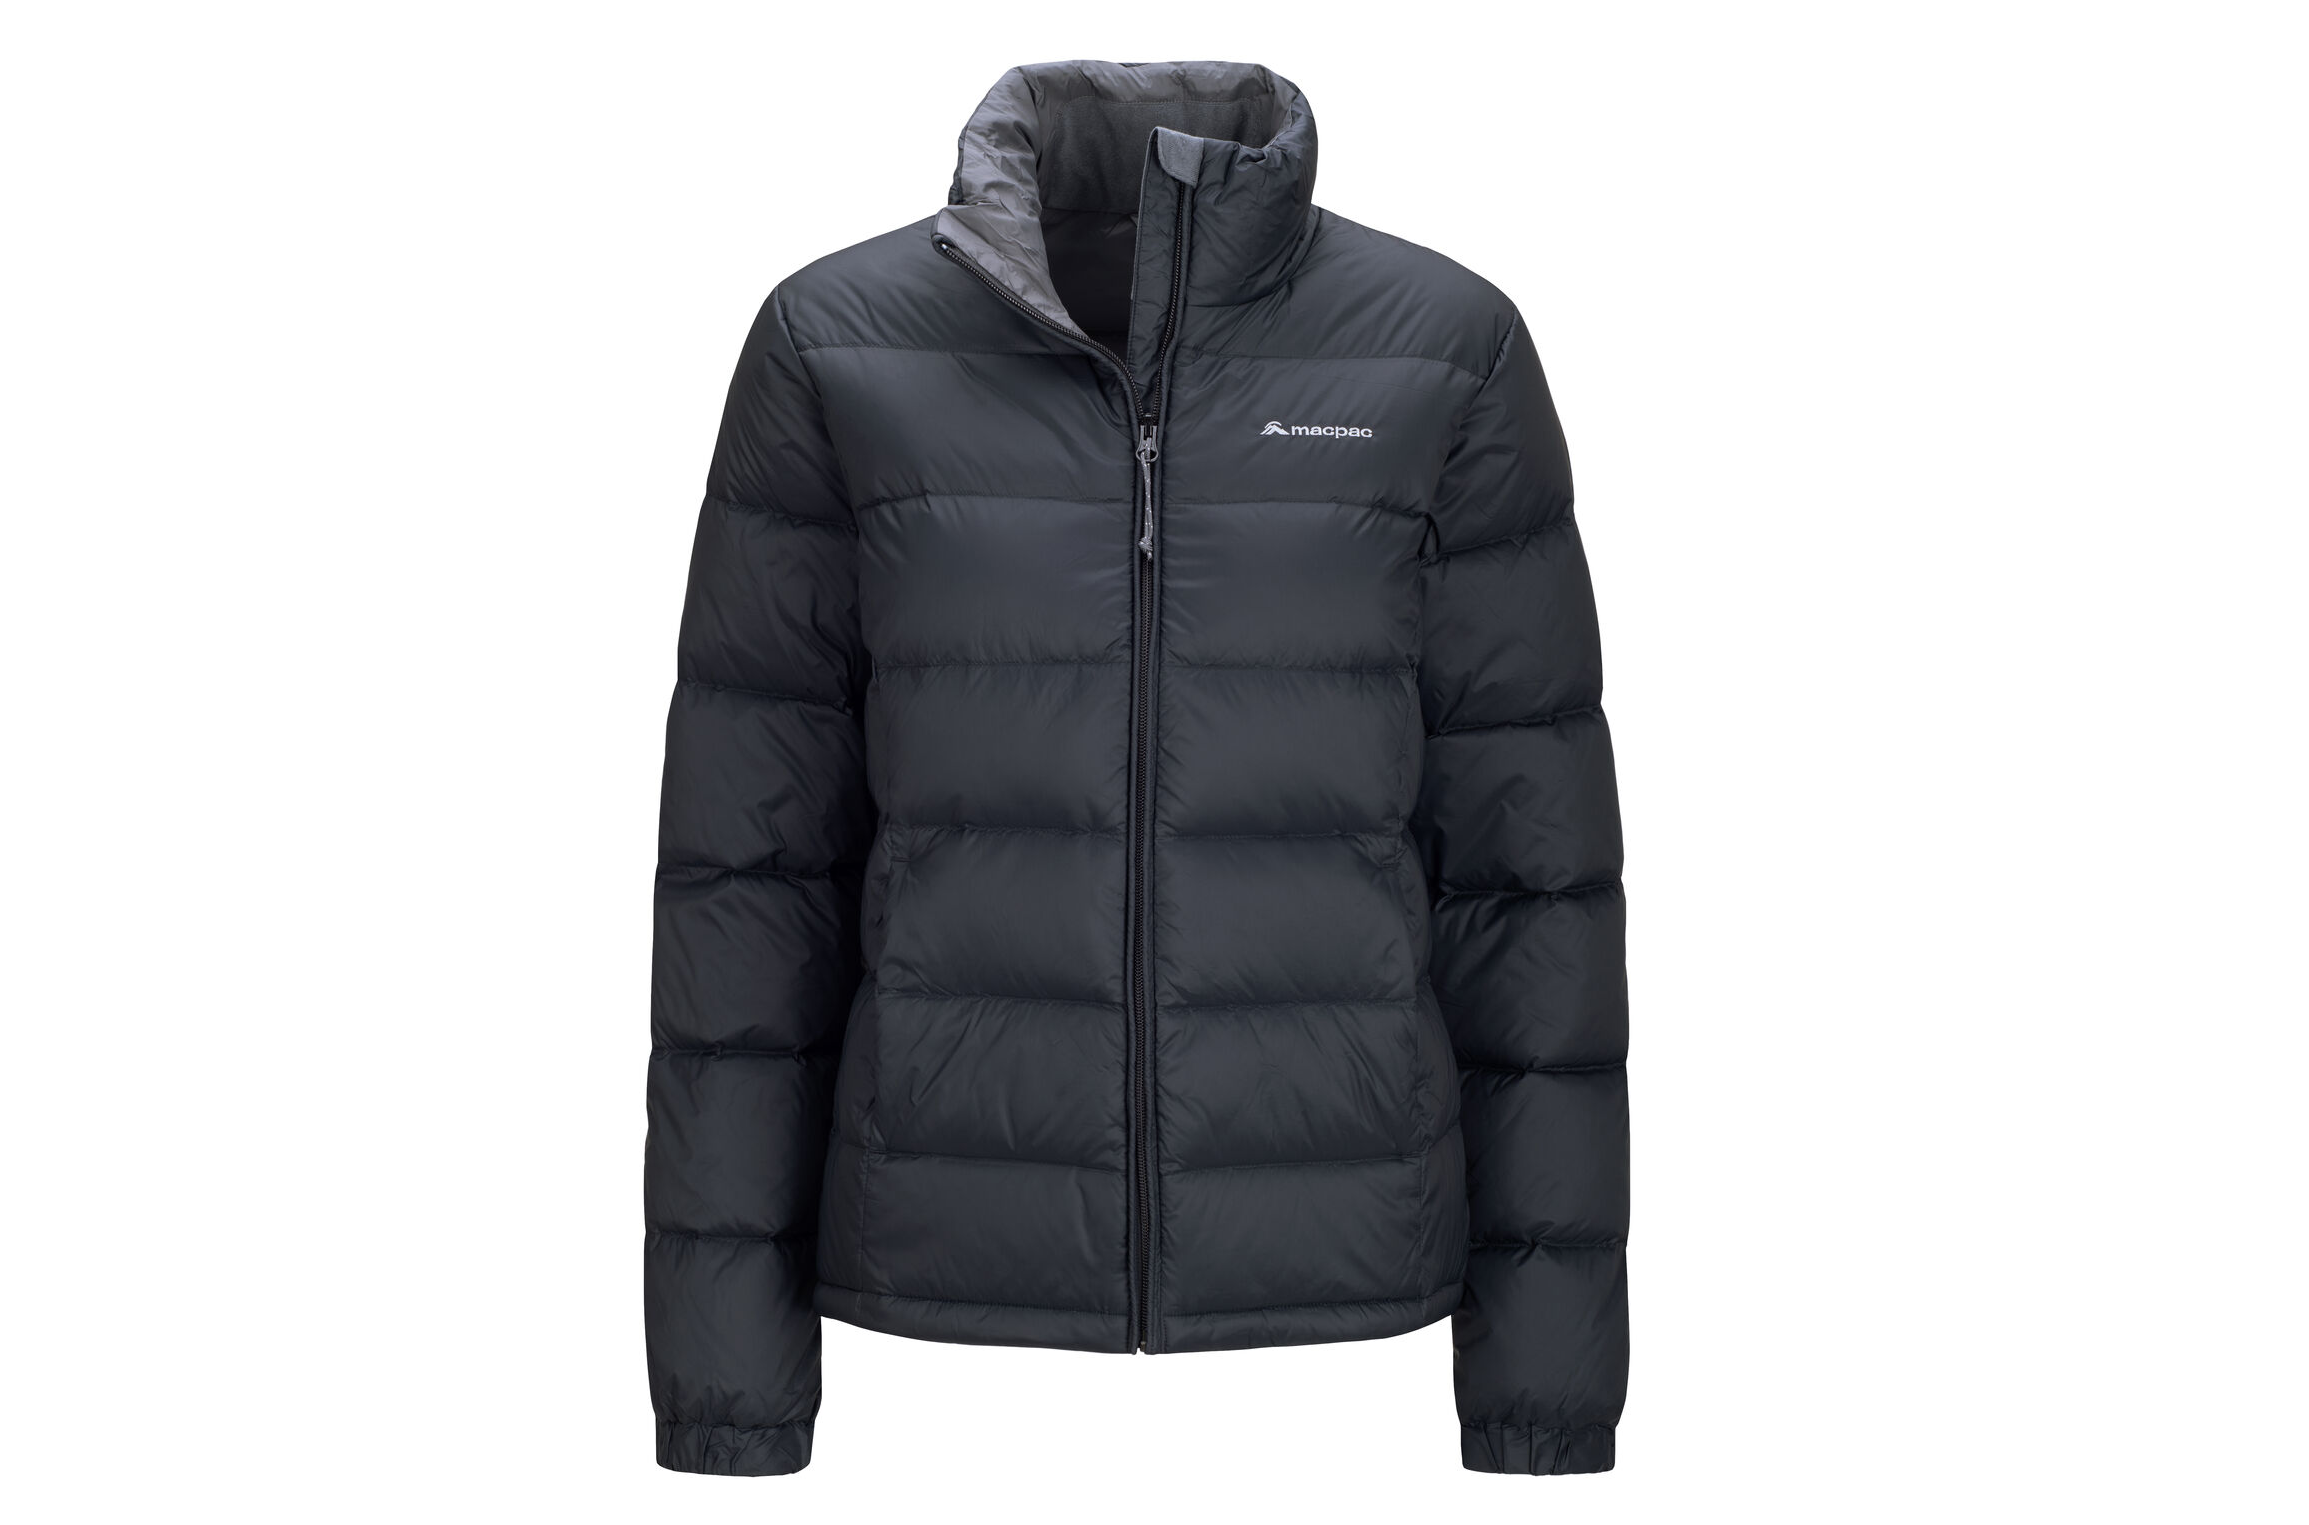 Macpac Women's Halo Down Jacket now $99 delivered at Macpac